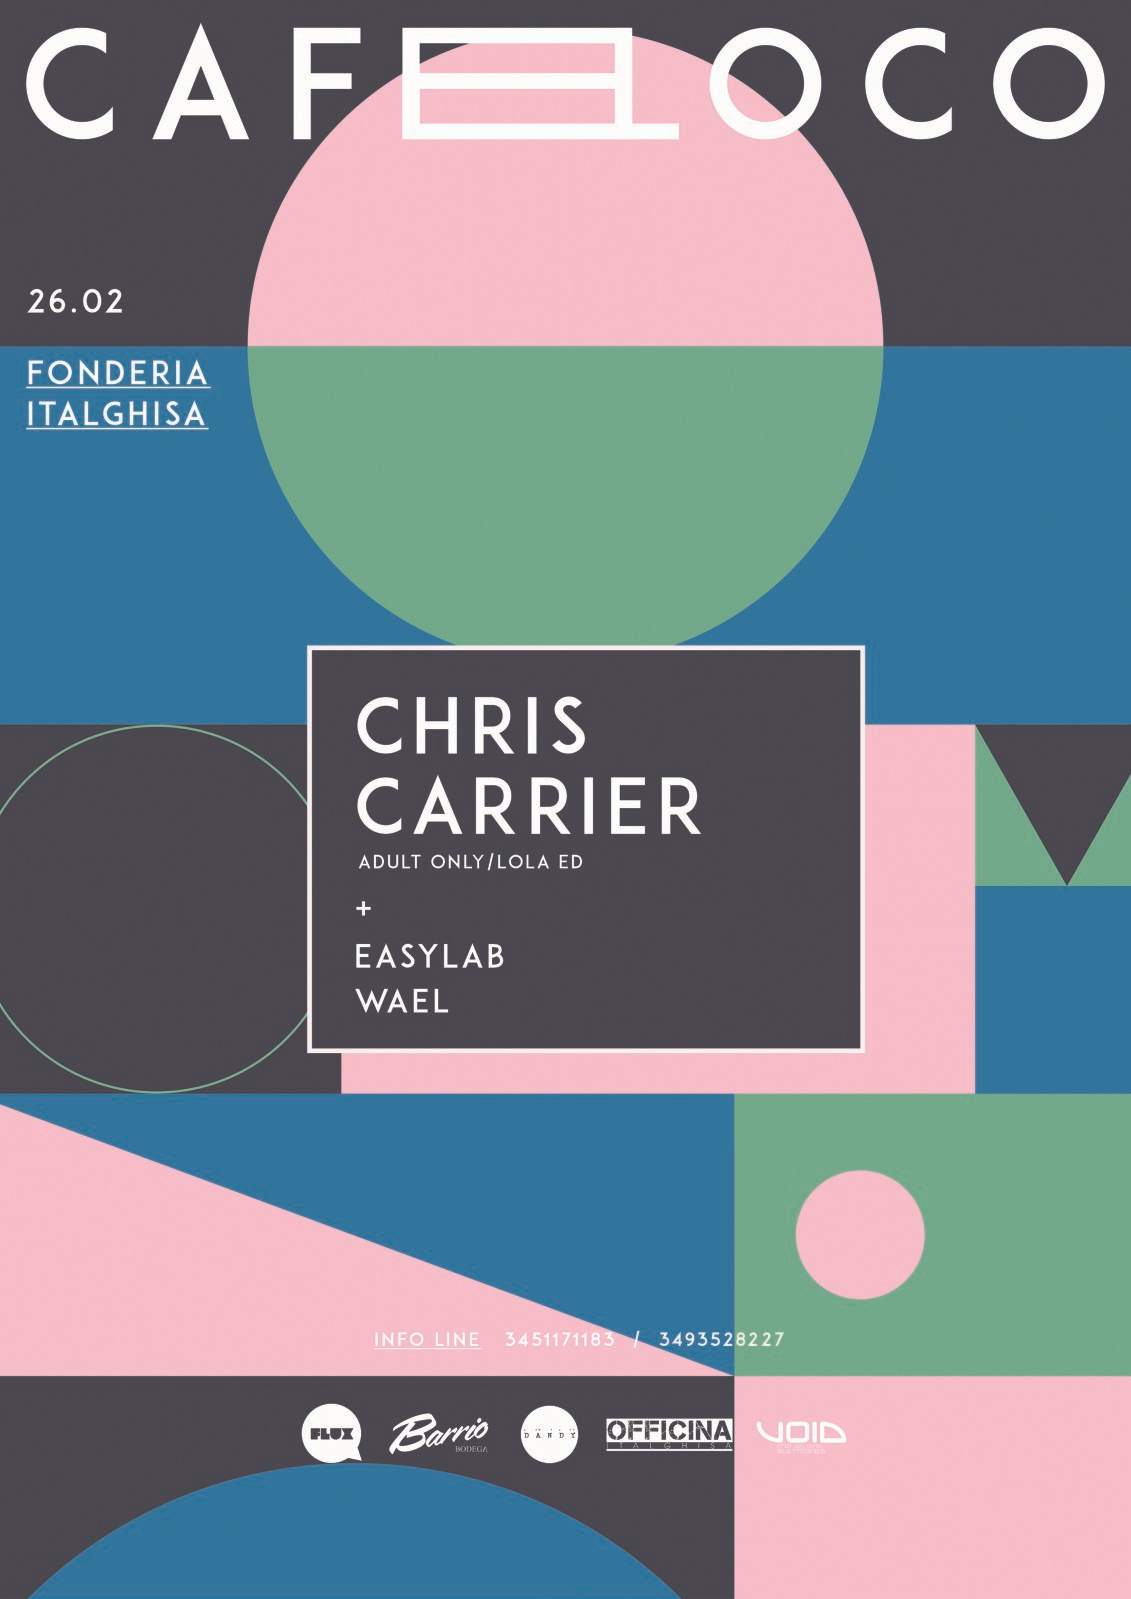 Cafeloco with Chris Carrier, Easylab - フライヤー表